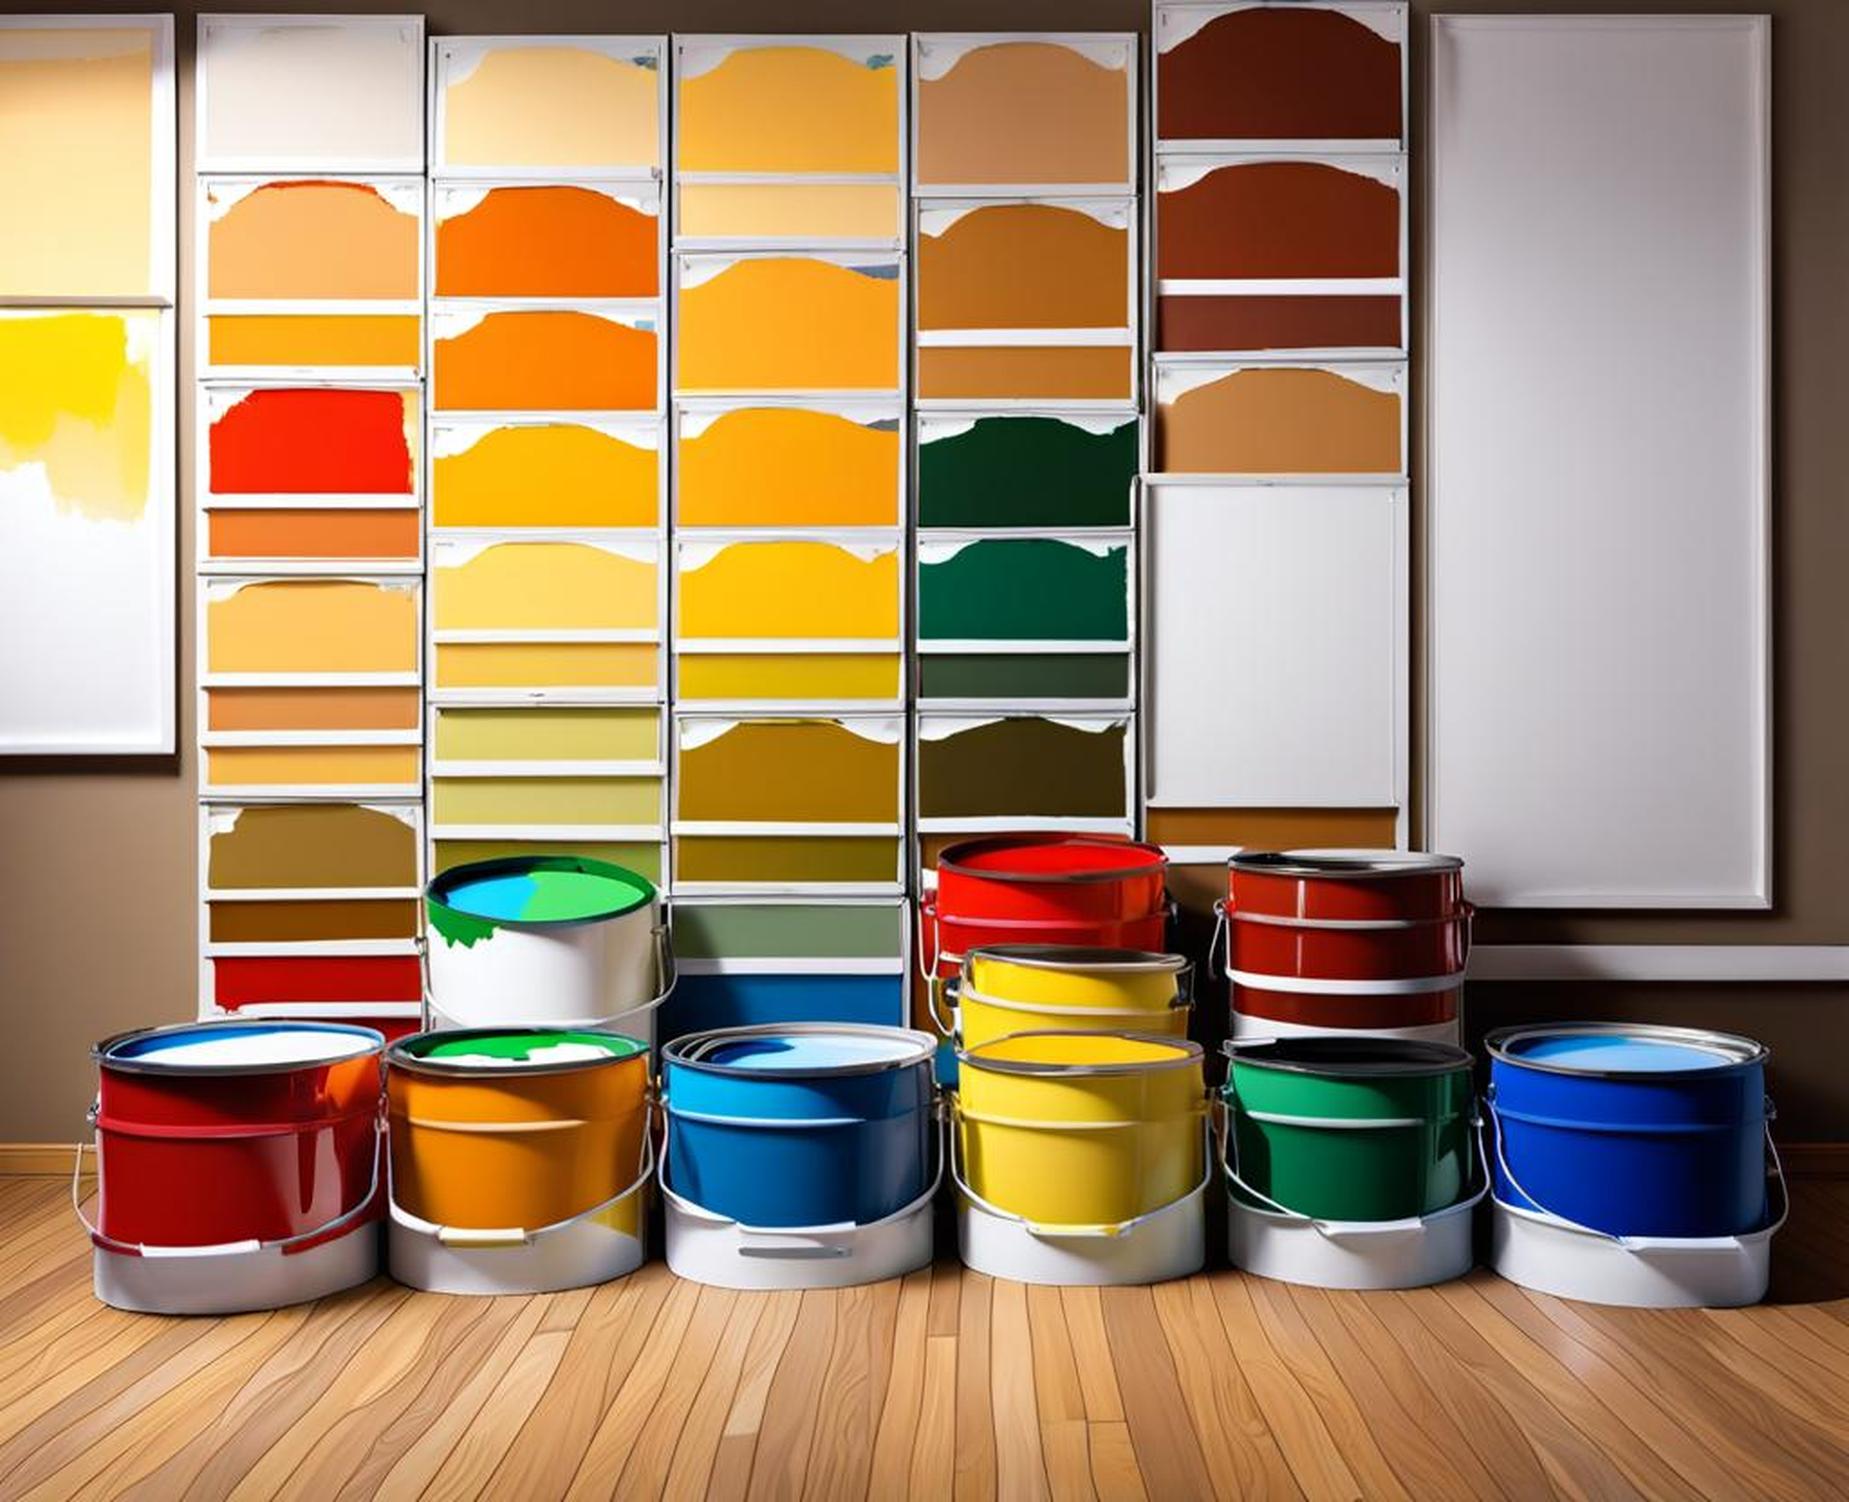 How Much Paint For That Living Room Makeover?